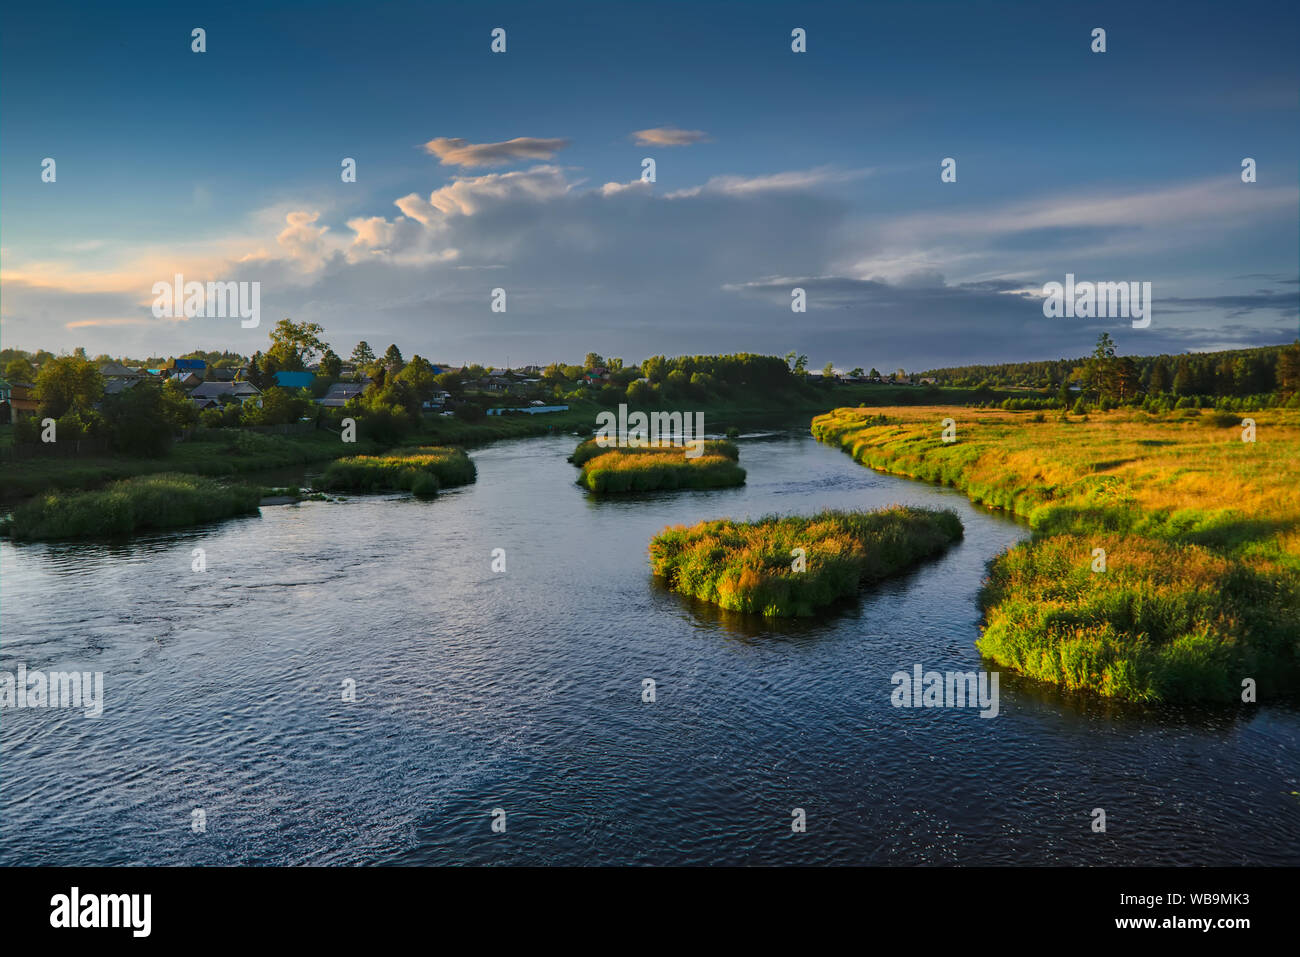 The Russian village on the banks of the river against the backdrop of the setting sun. Stock Photo